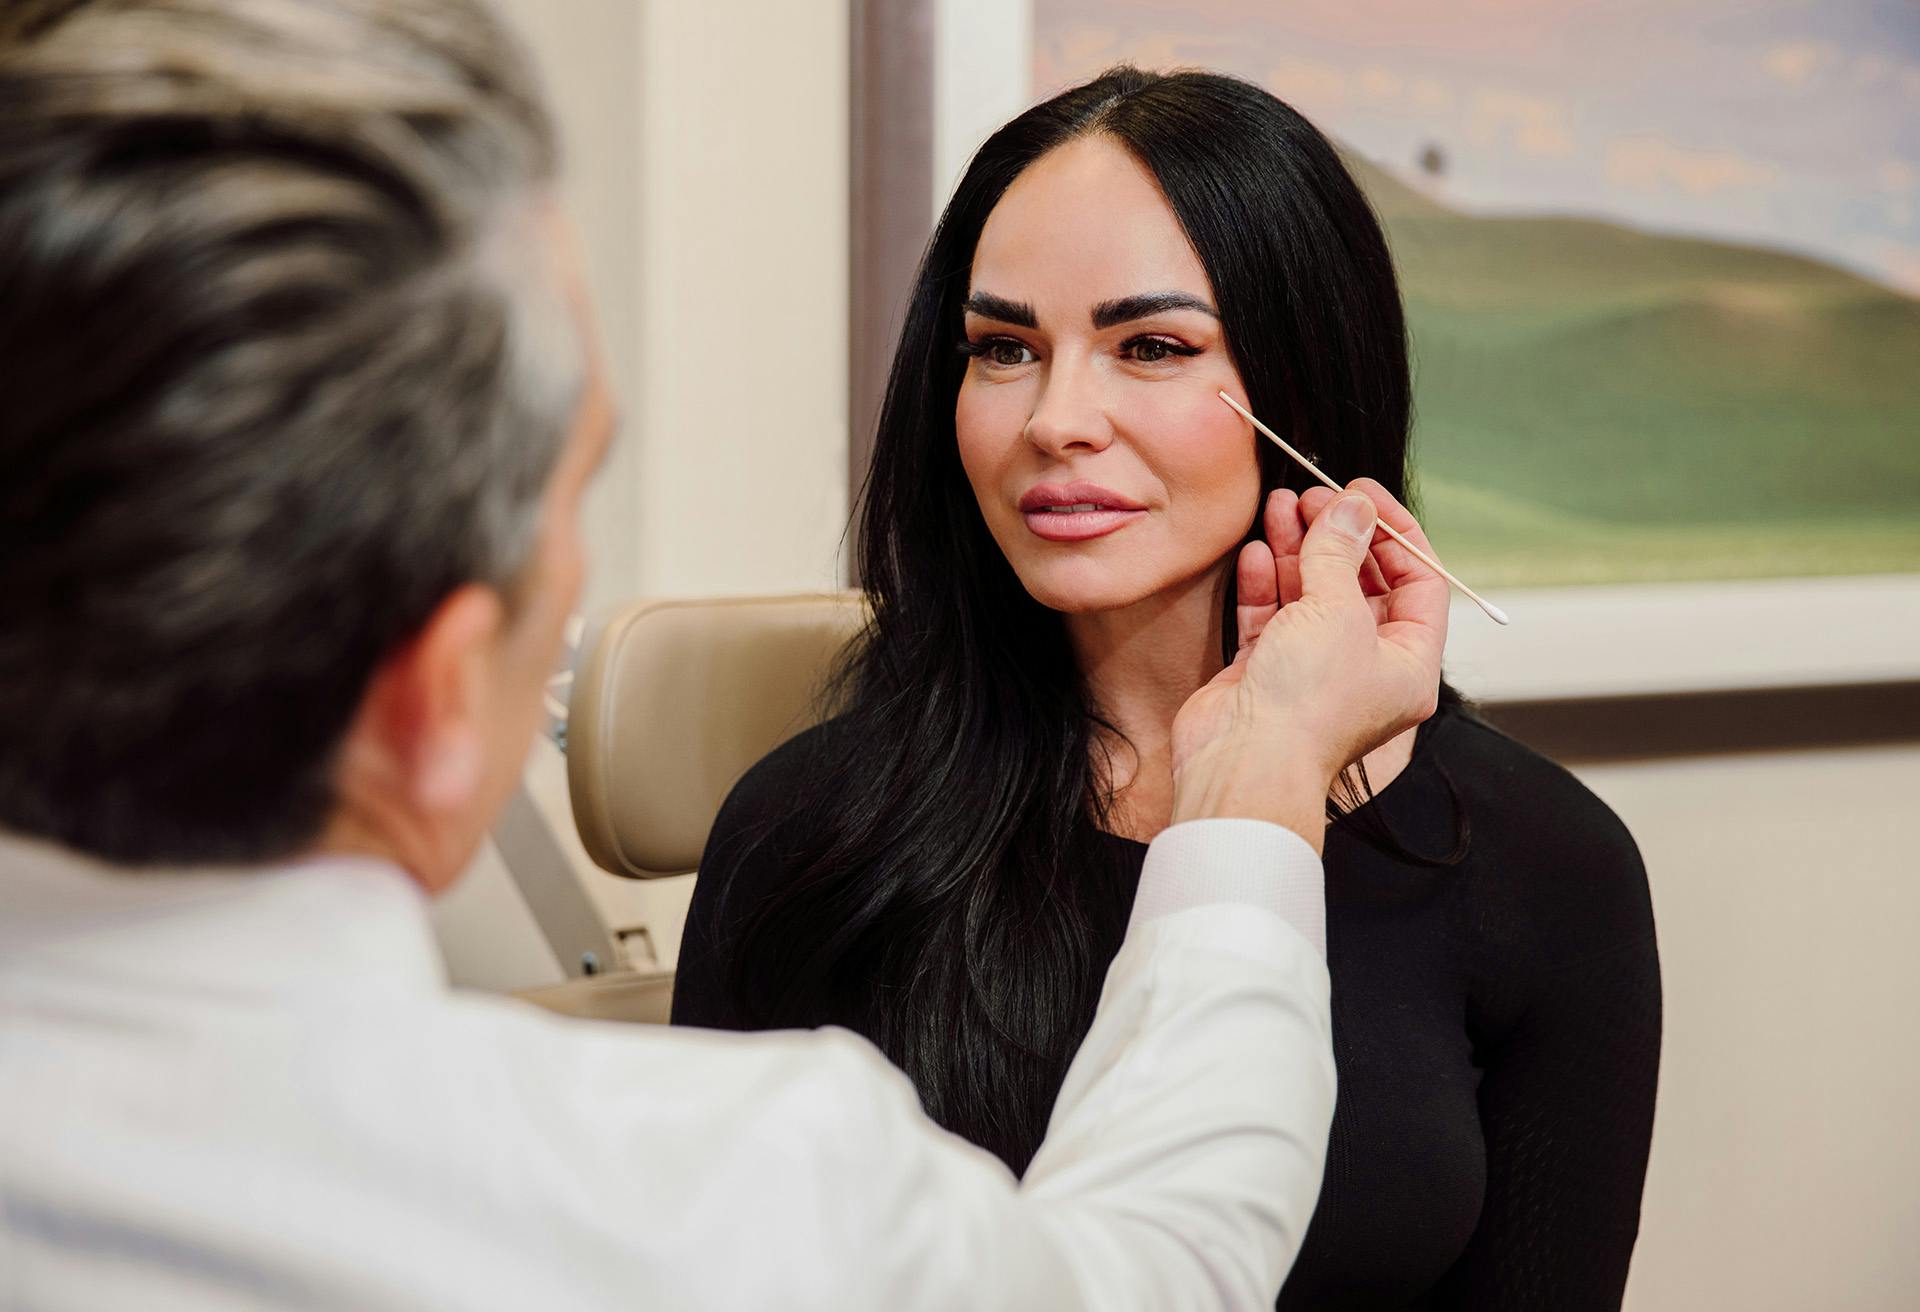 Woman getting botox injections